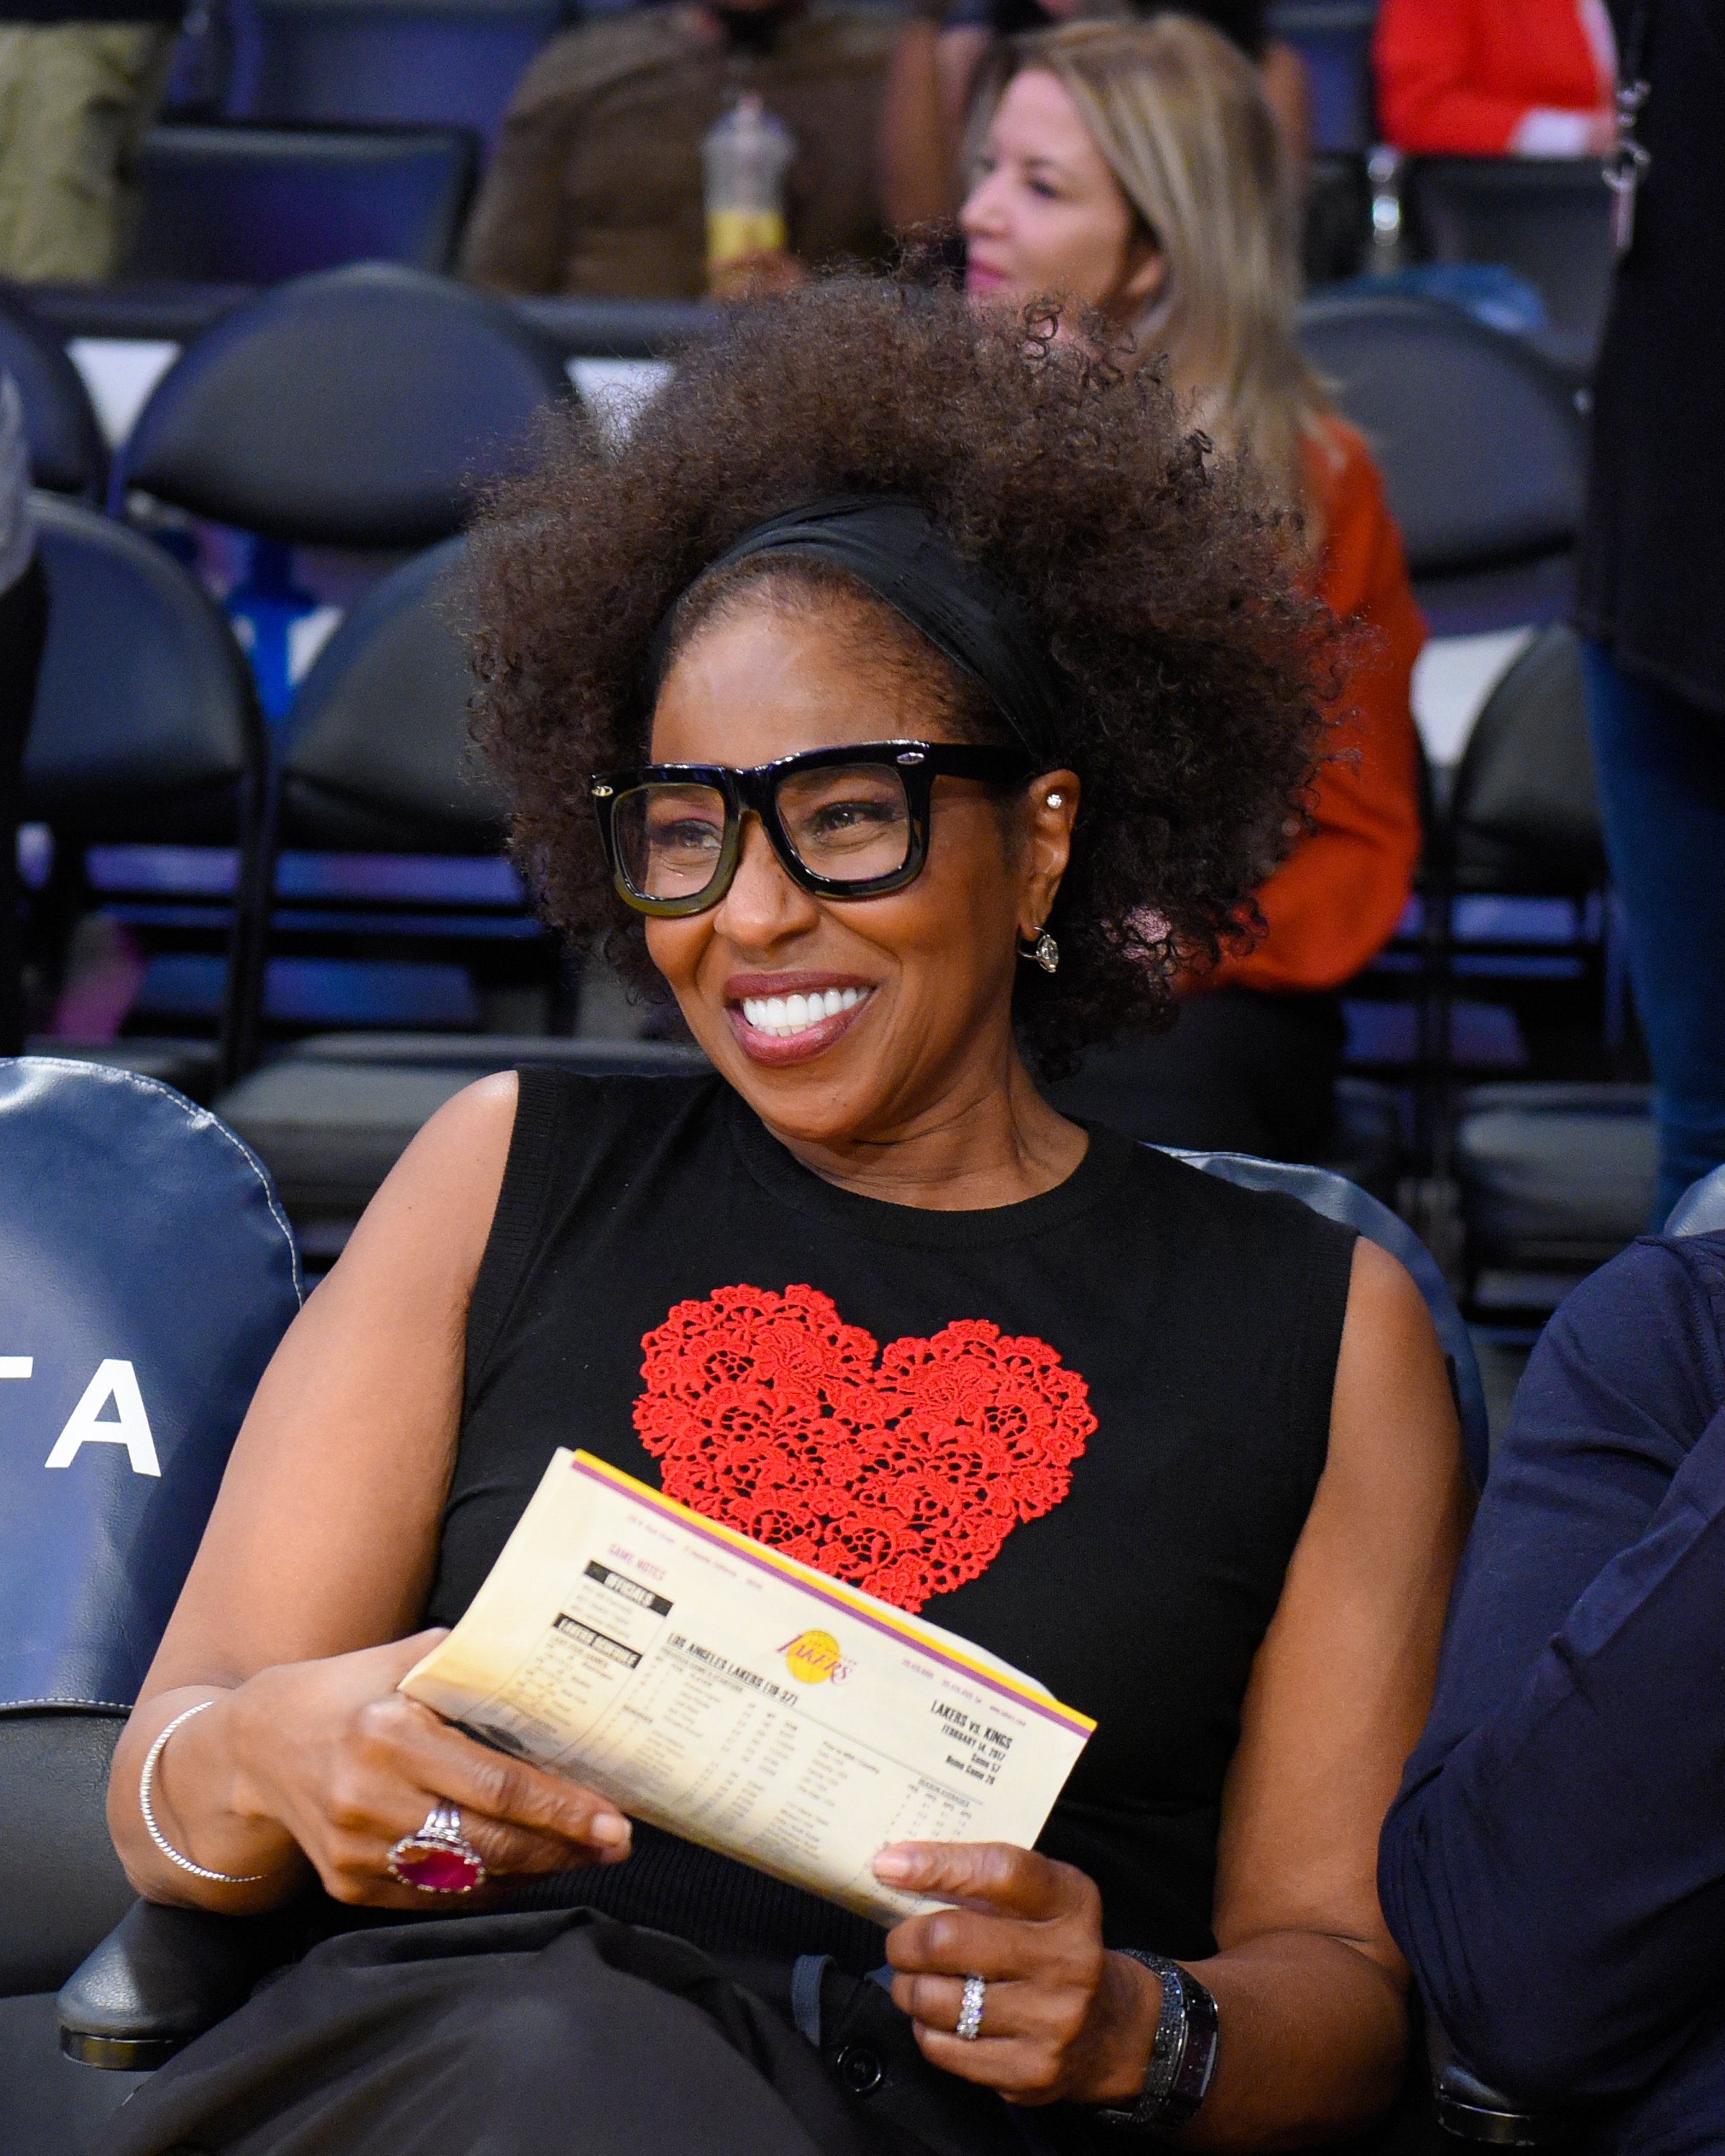 Pauletta Washington at a basketball game between the Sacramento Kings and the Los Angeles Lakers at Staples Center on February 14, 2017 in Los Angeles, California. | Source: Getty Images